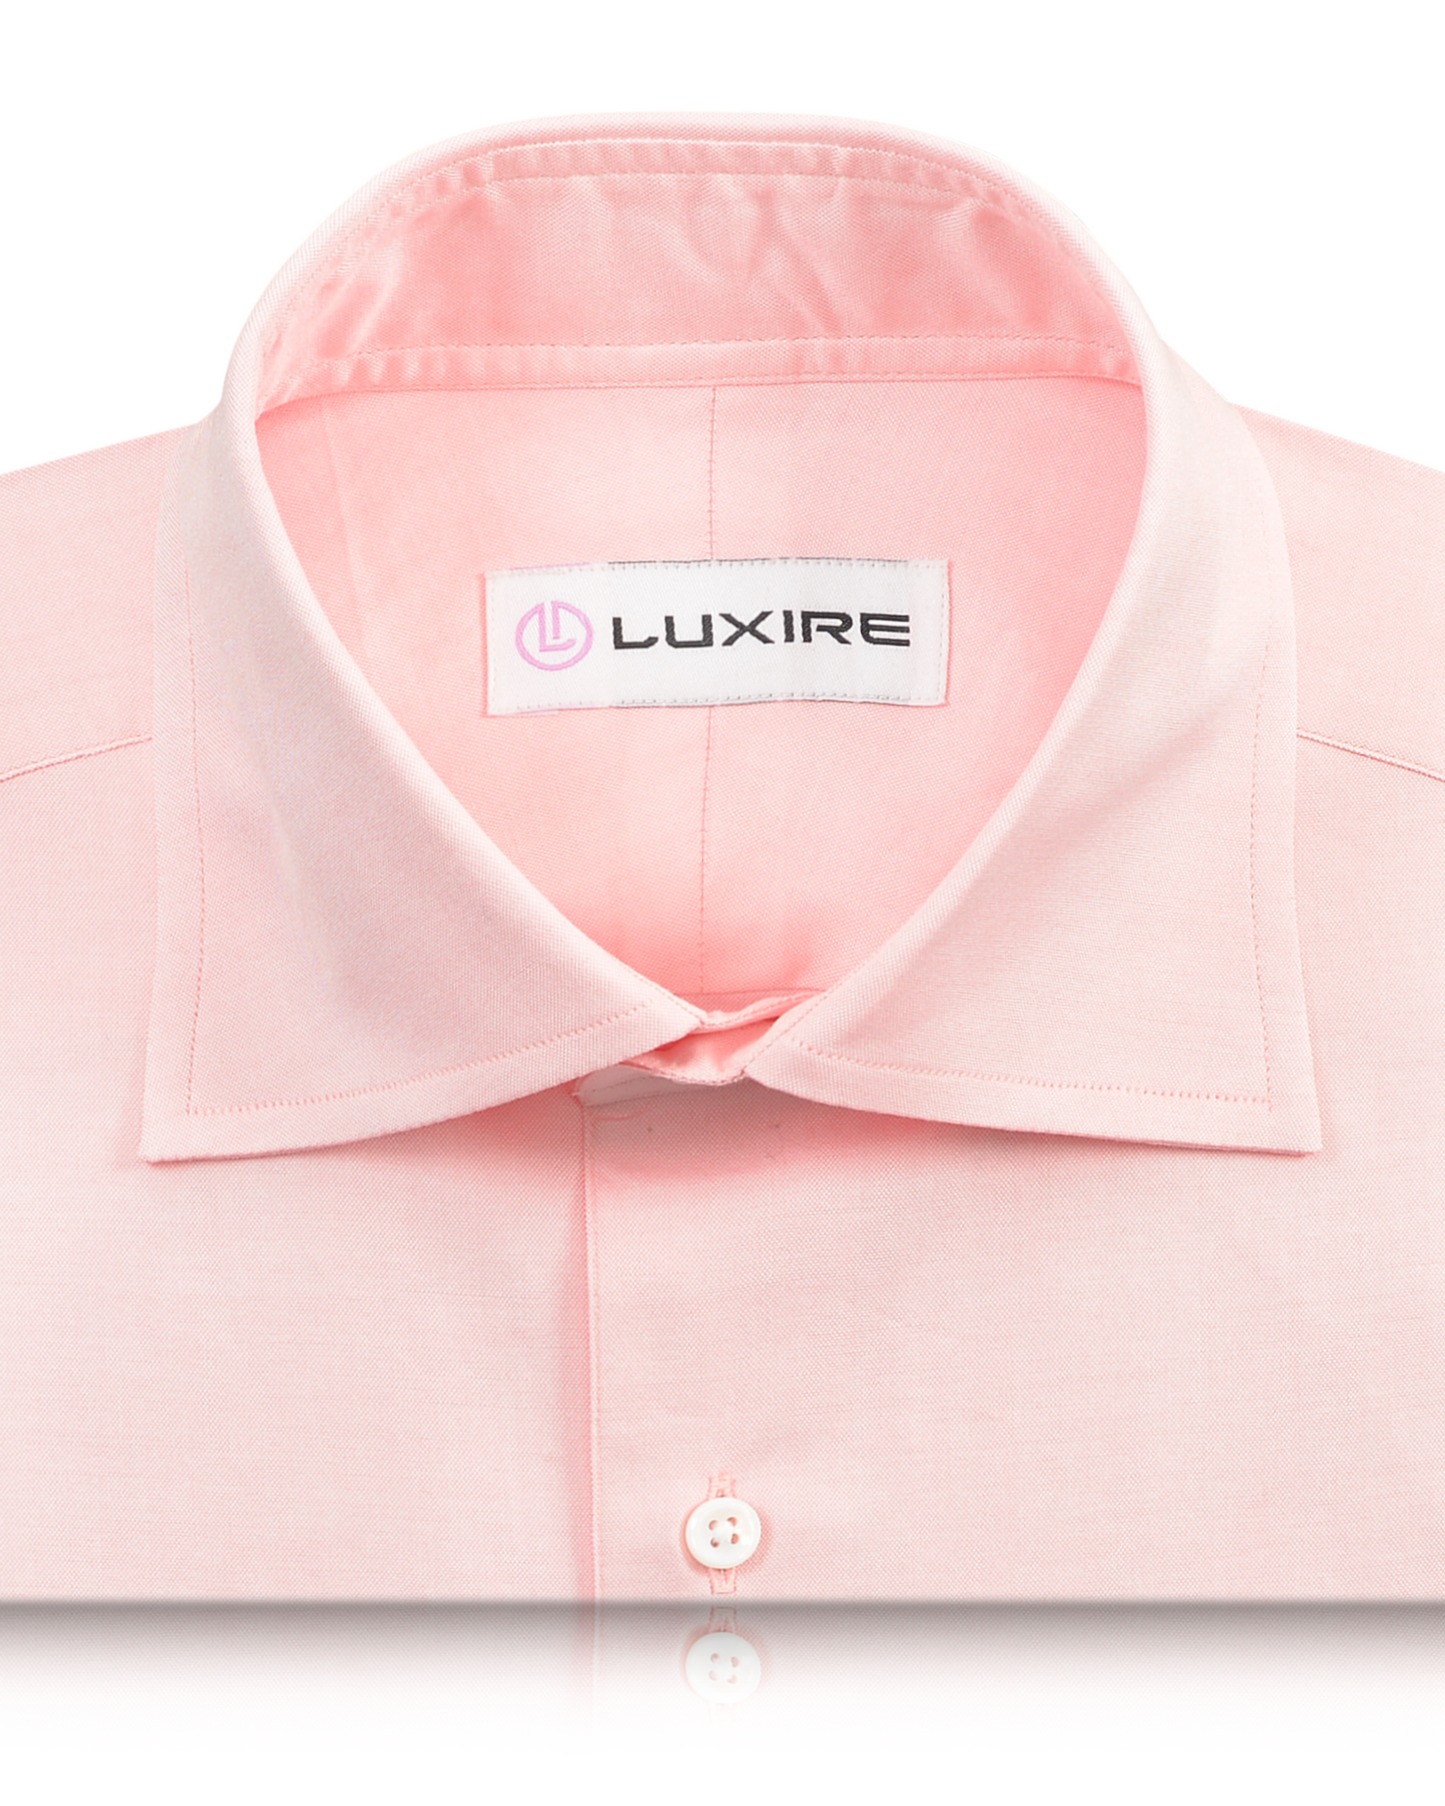 Collar of the custom oxford shirt for men by Luxire in peach pinpoint